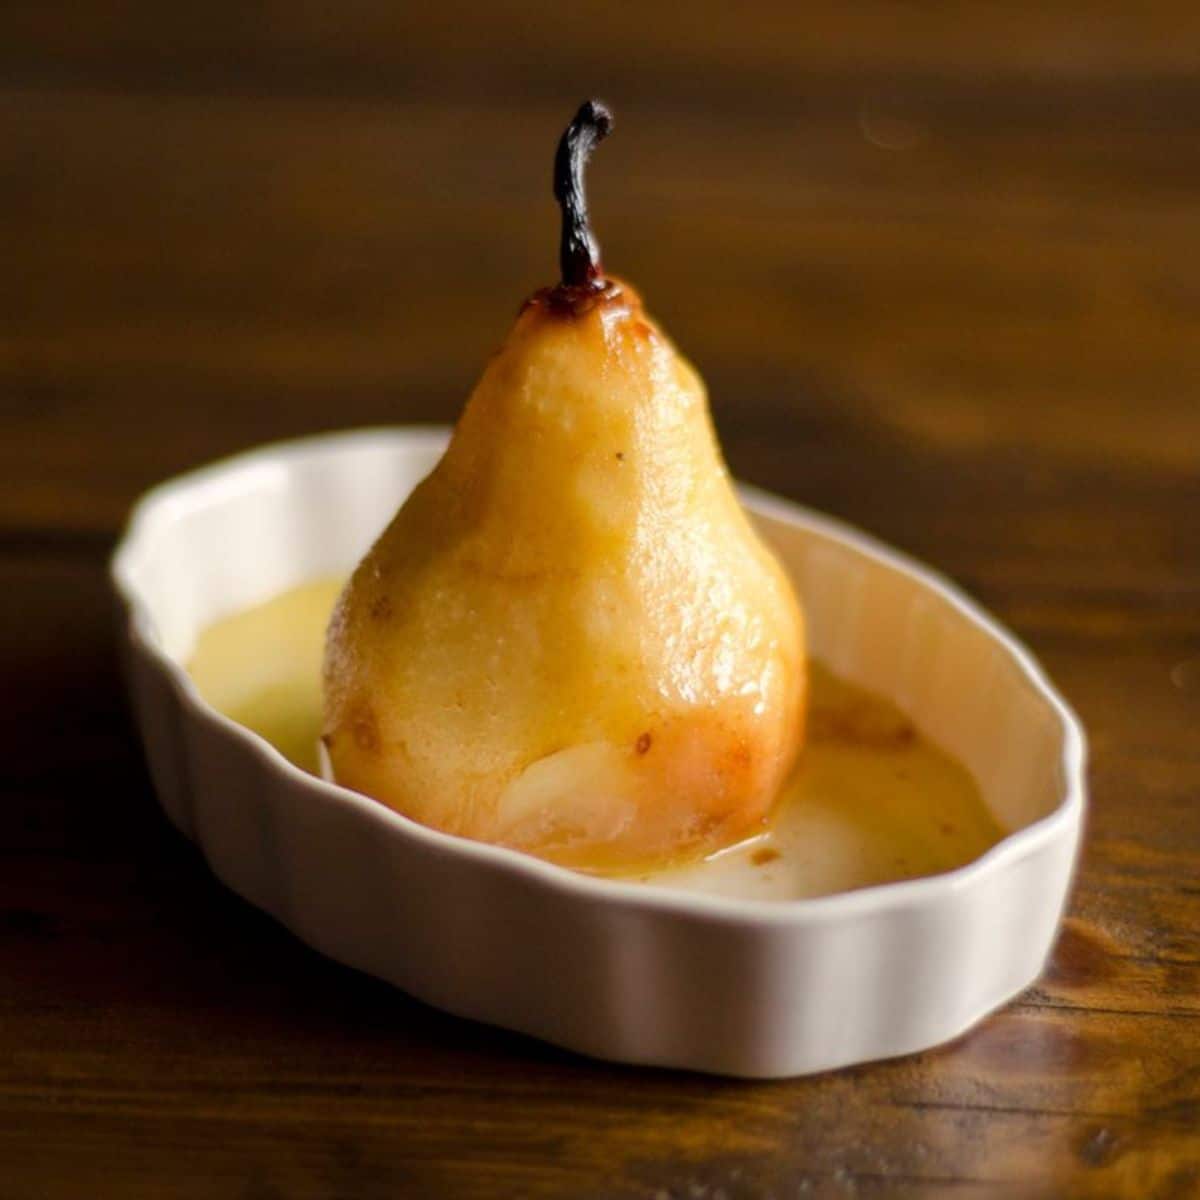 baked pears featured